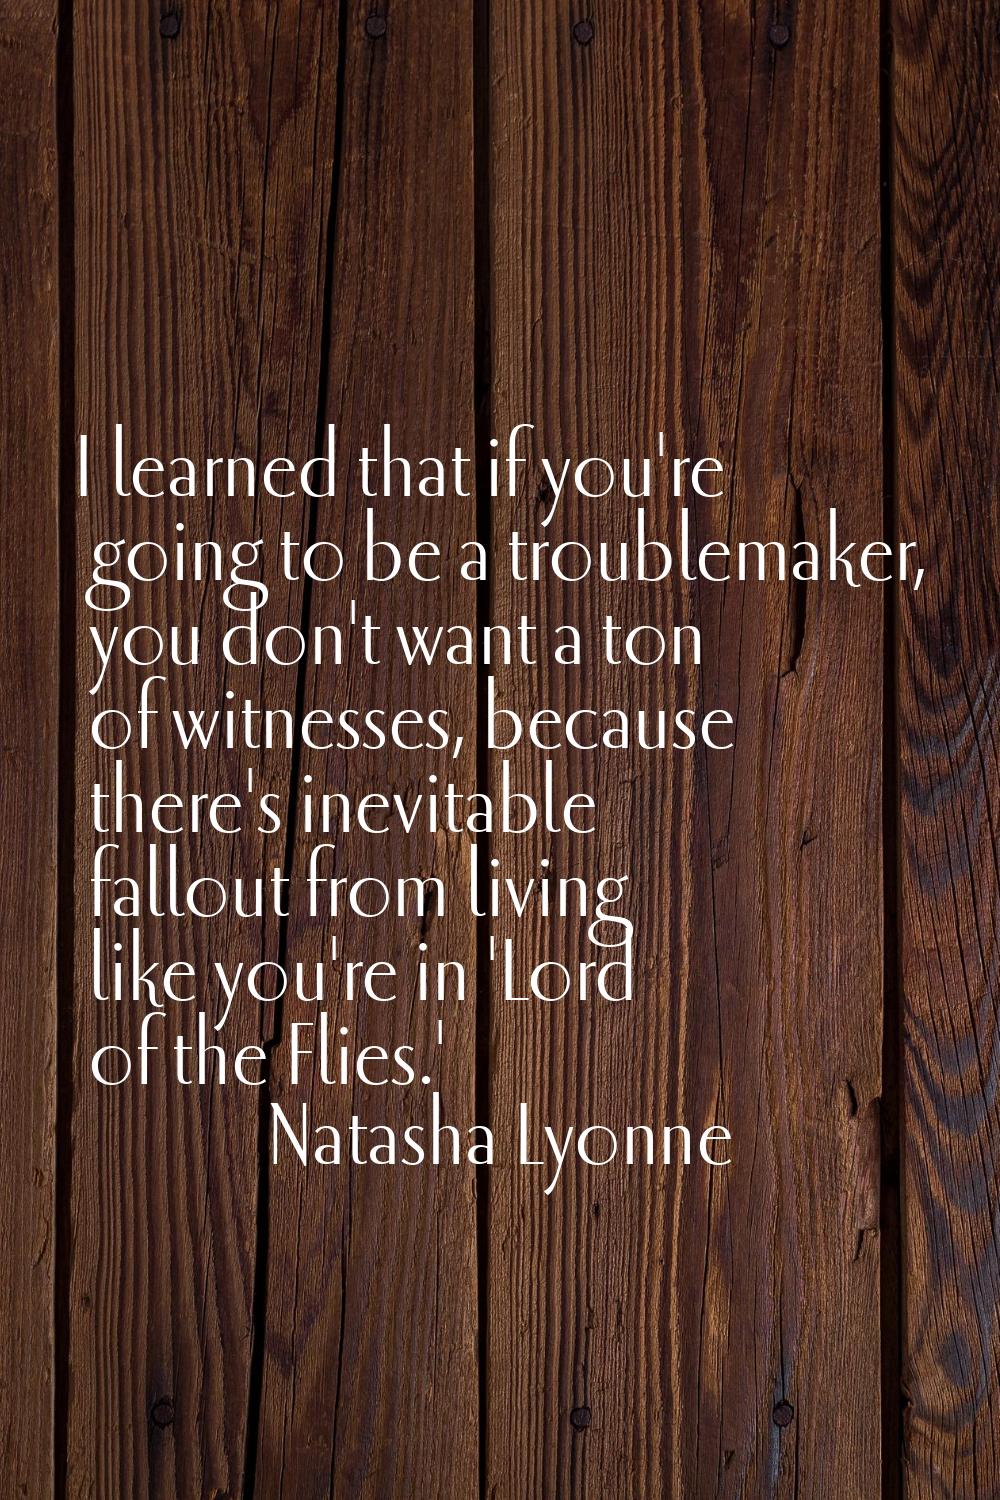 I learned that if you're going to be a troublemaker, you don't want a ton of witnesses, because the